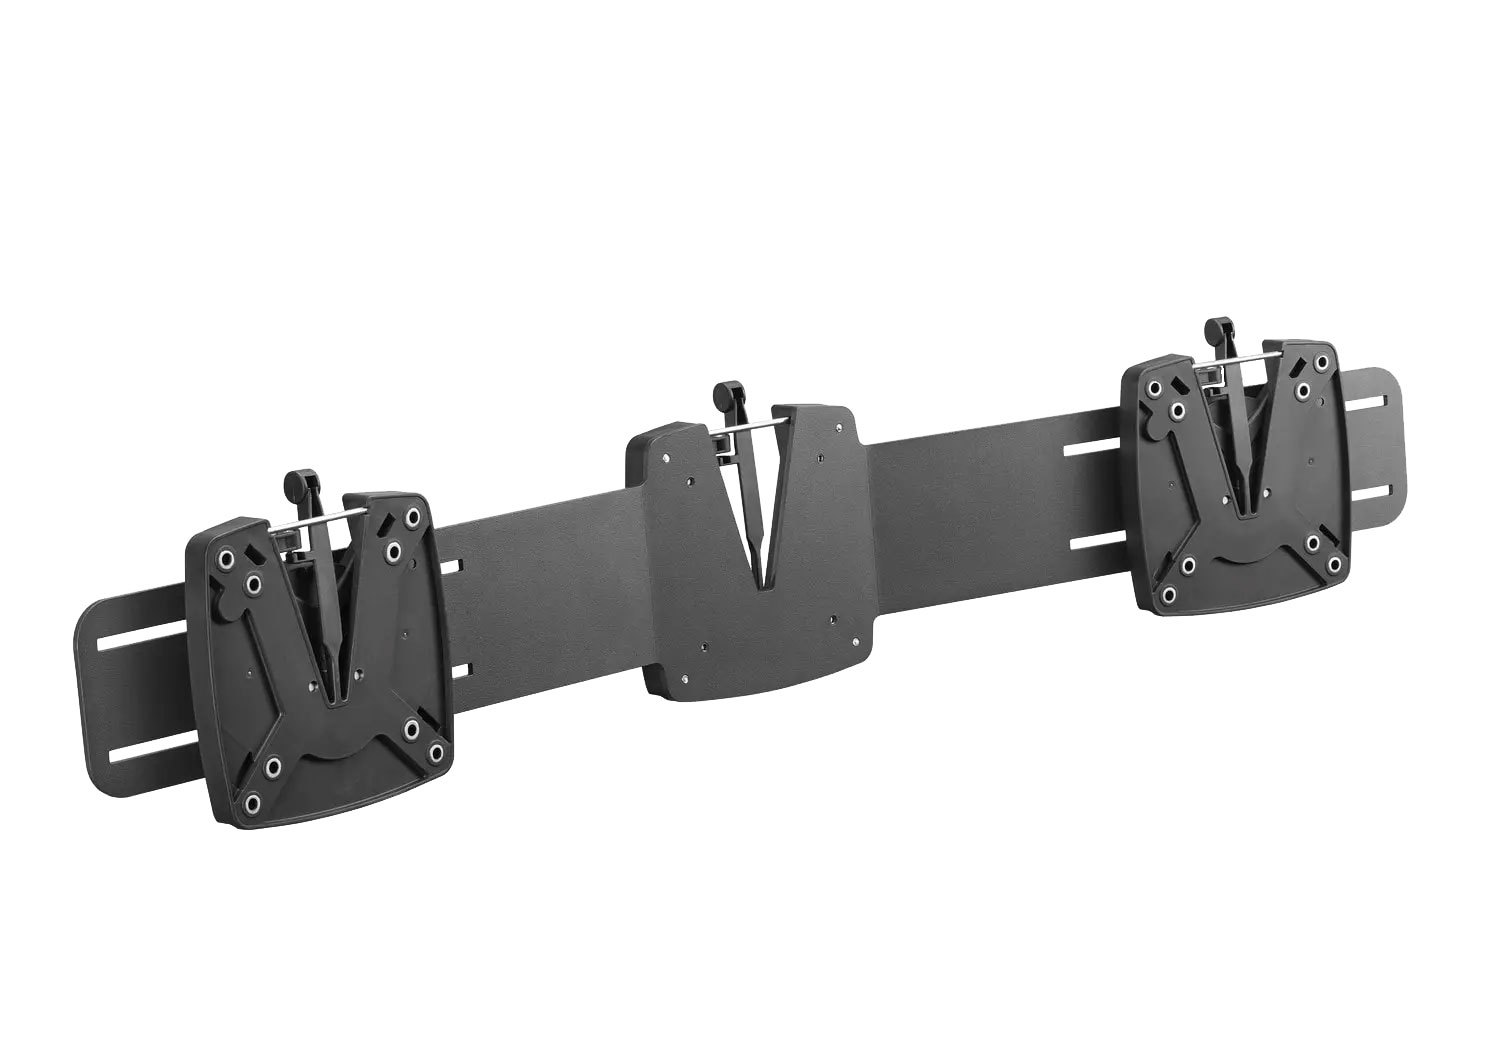 Dual monitor mount for monitor support arms